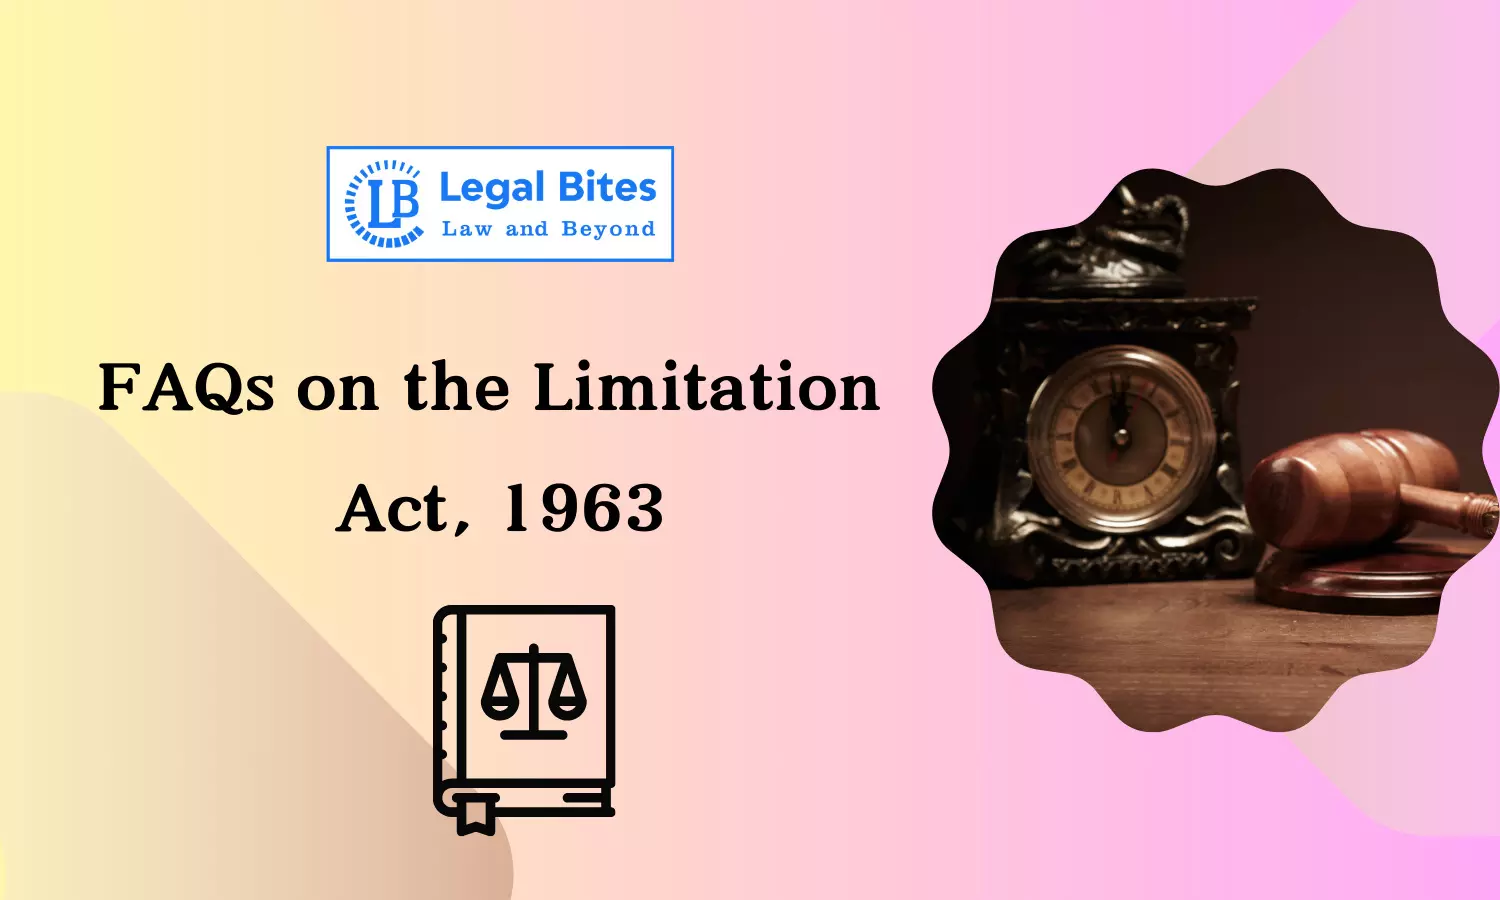 FAQs on the Limitation Act, 1963